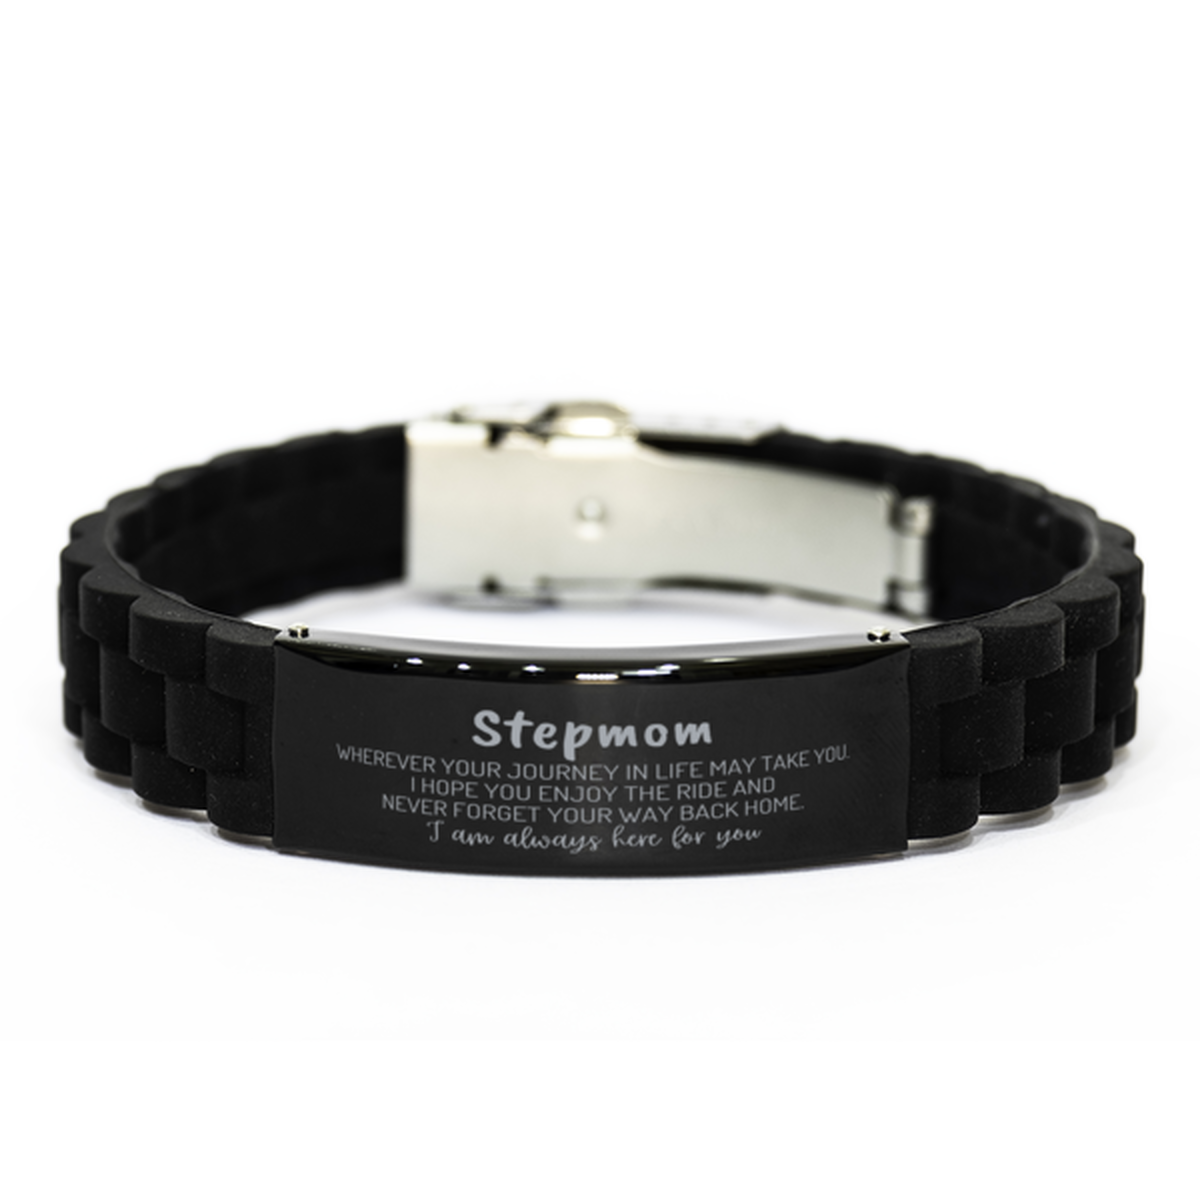 Stepmom wherever your journey in life may take you, I am always here for you Stepmom Black Glidelock Clasp Bracelet, Awesome Christmas Gifts For Stepmom, Stepmom Birthday Gifts for Men Women Family Loved One